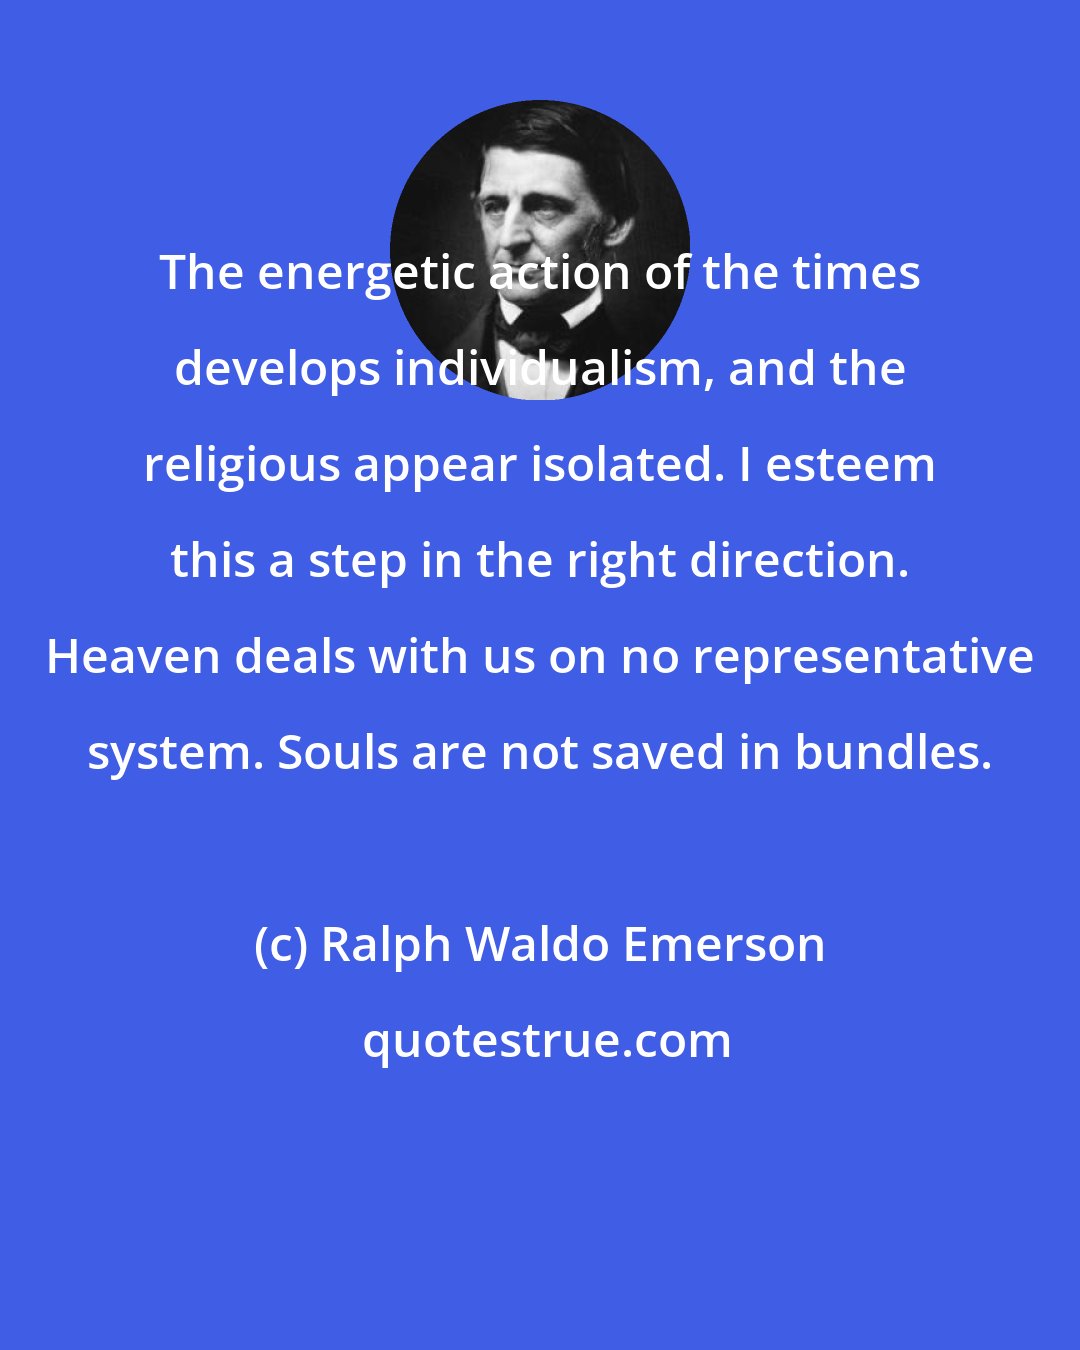 Ralph Waldo Emerson: The energetic action of the times develops individualism, and the religious appear isolated. I esteem this a step in the right direction. Heaven deals with us on no representative system. Souls are not saved in bundles.